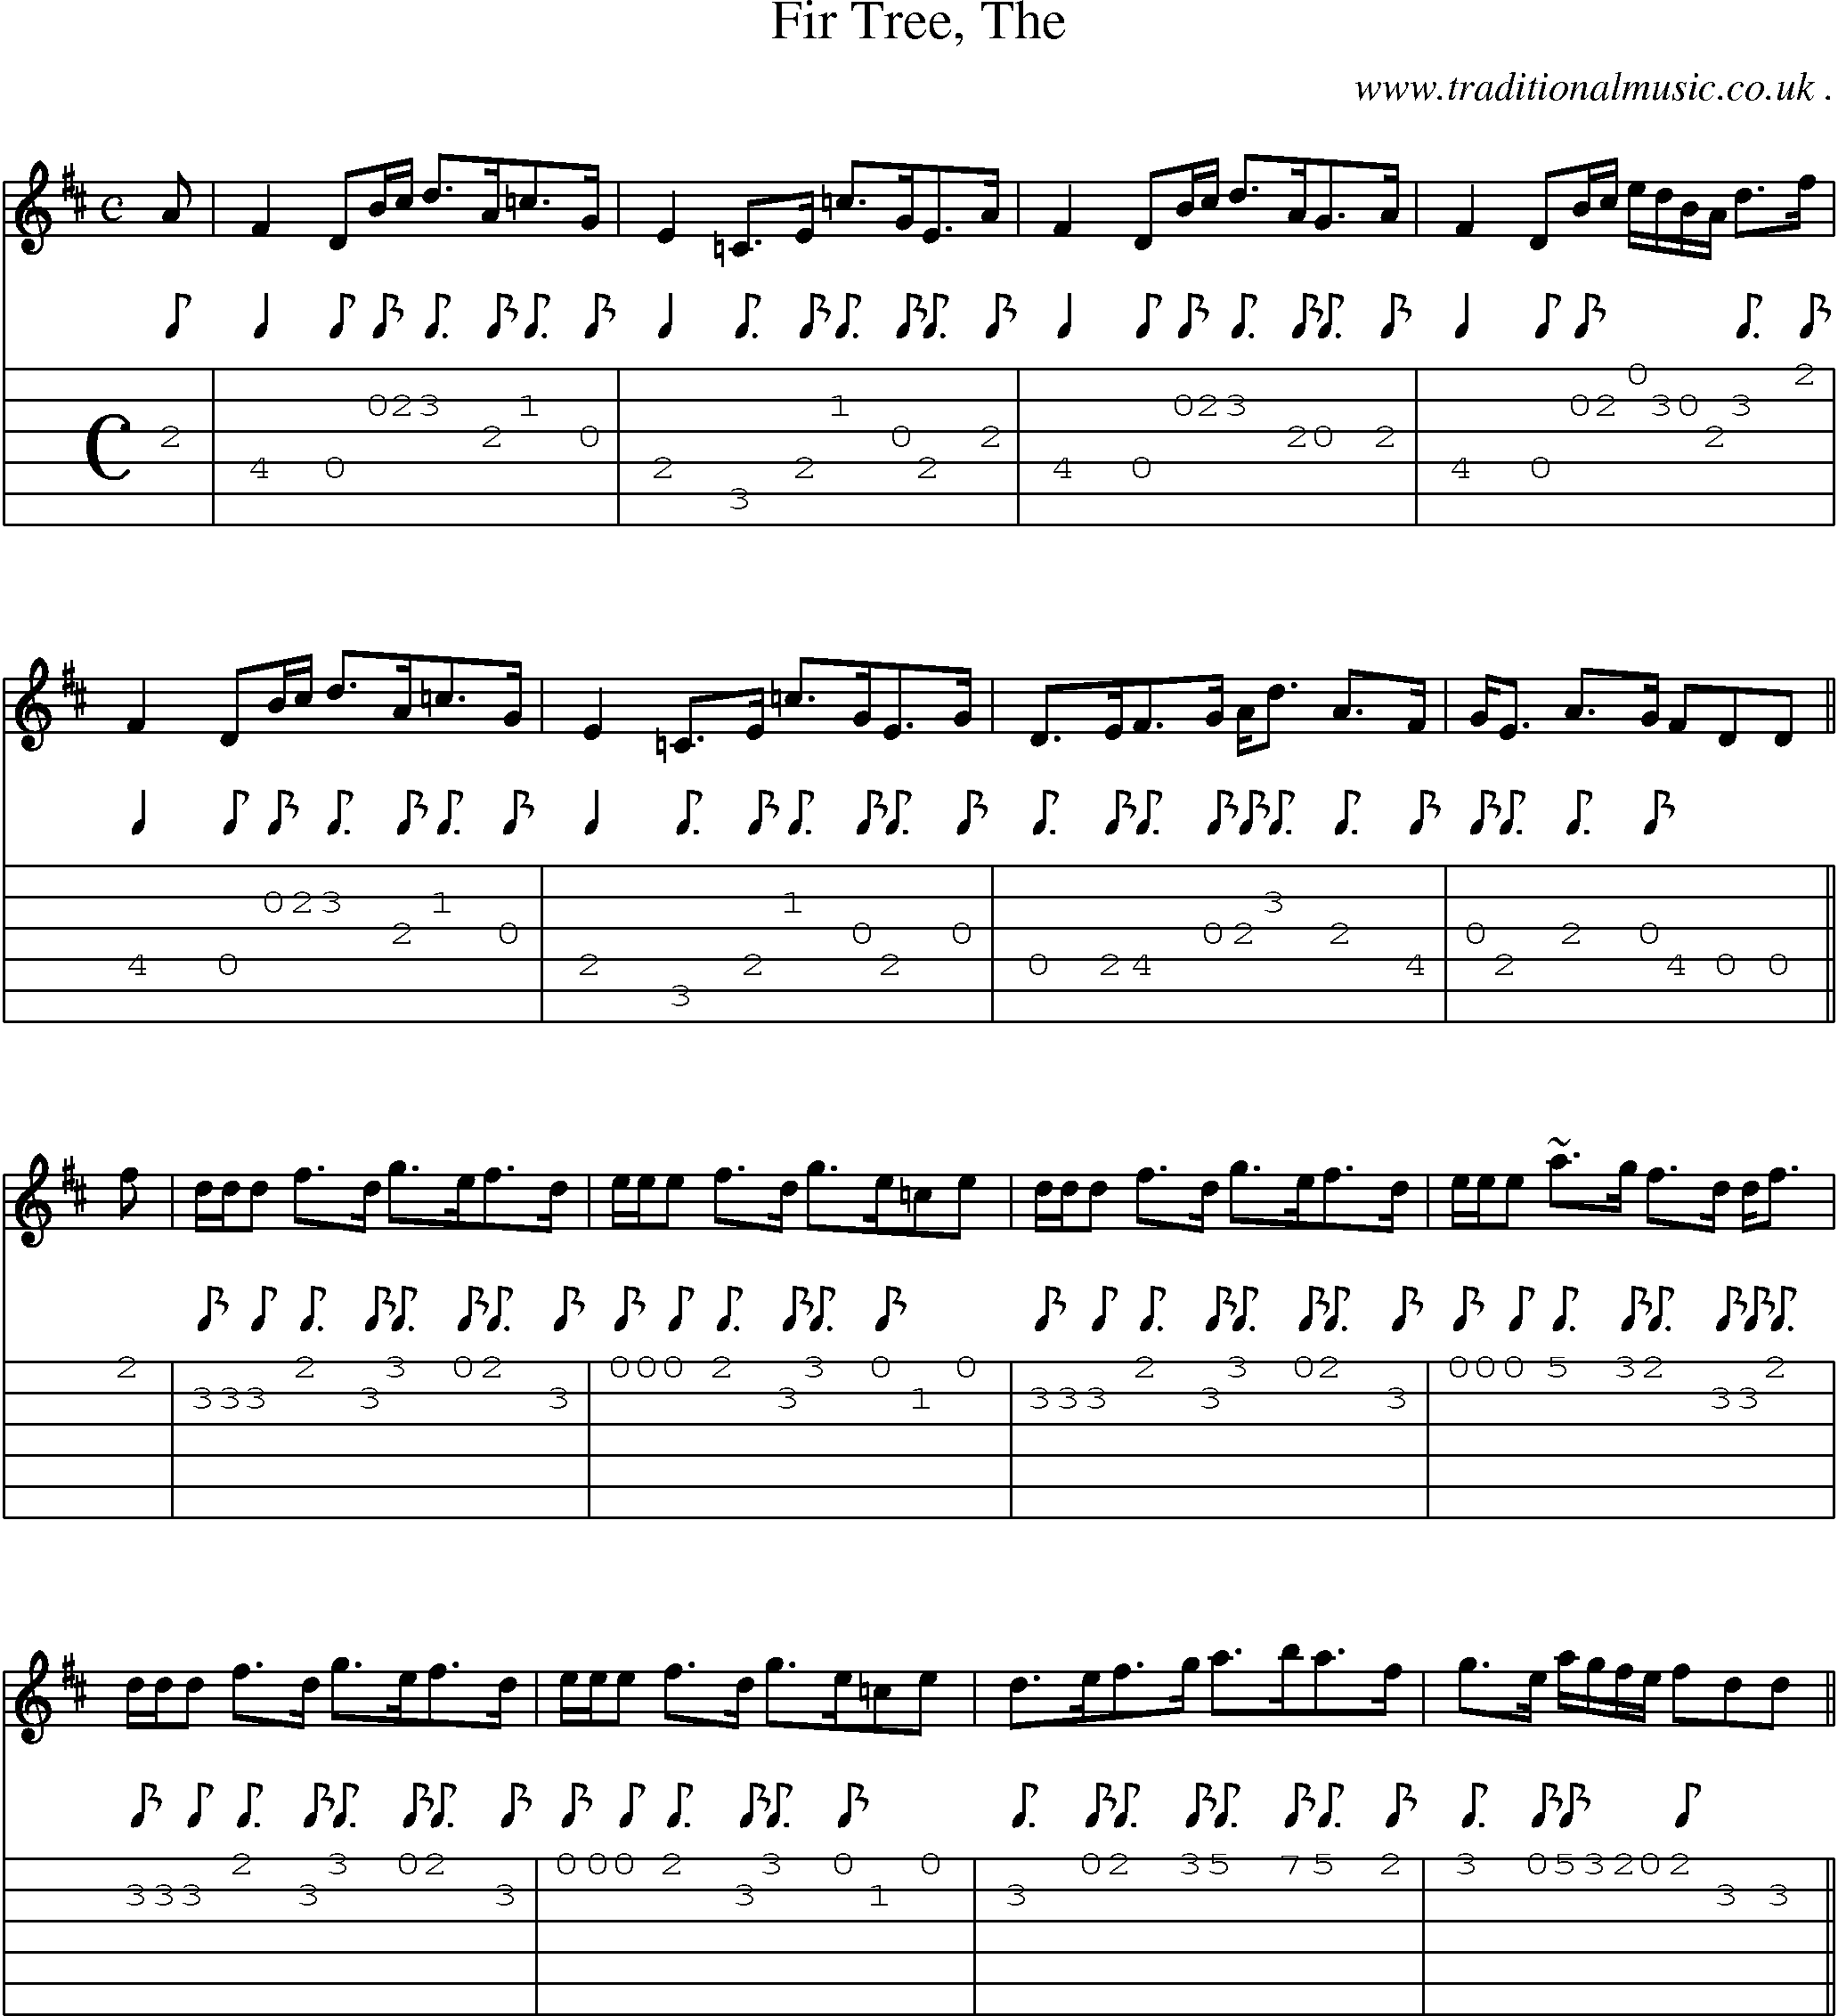 Sheet-music  score, Chords and Guitar Tabs for Fir Tree The